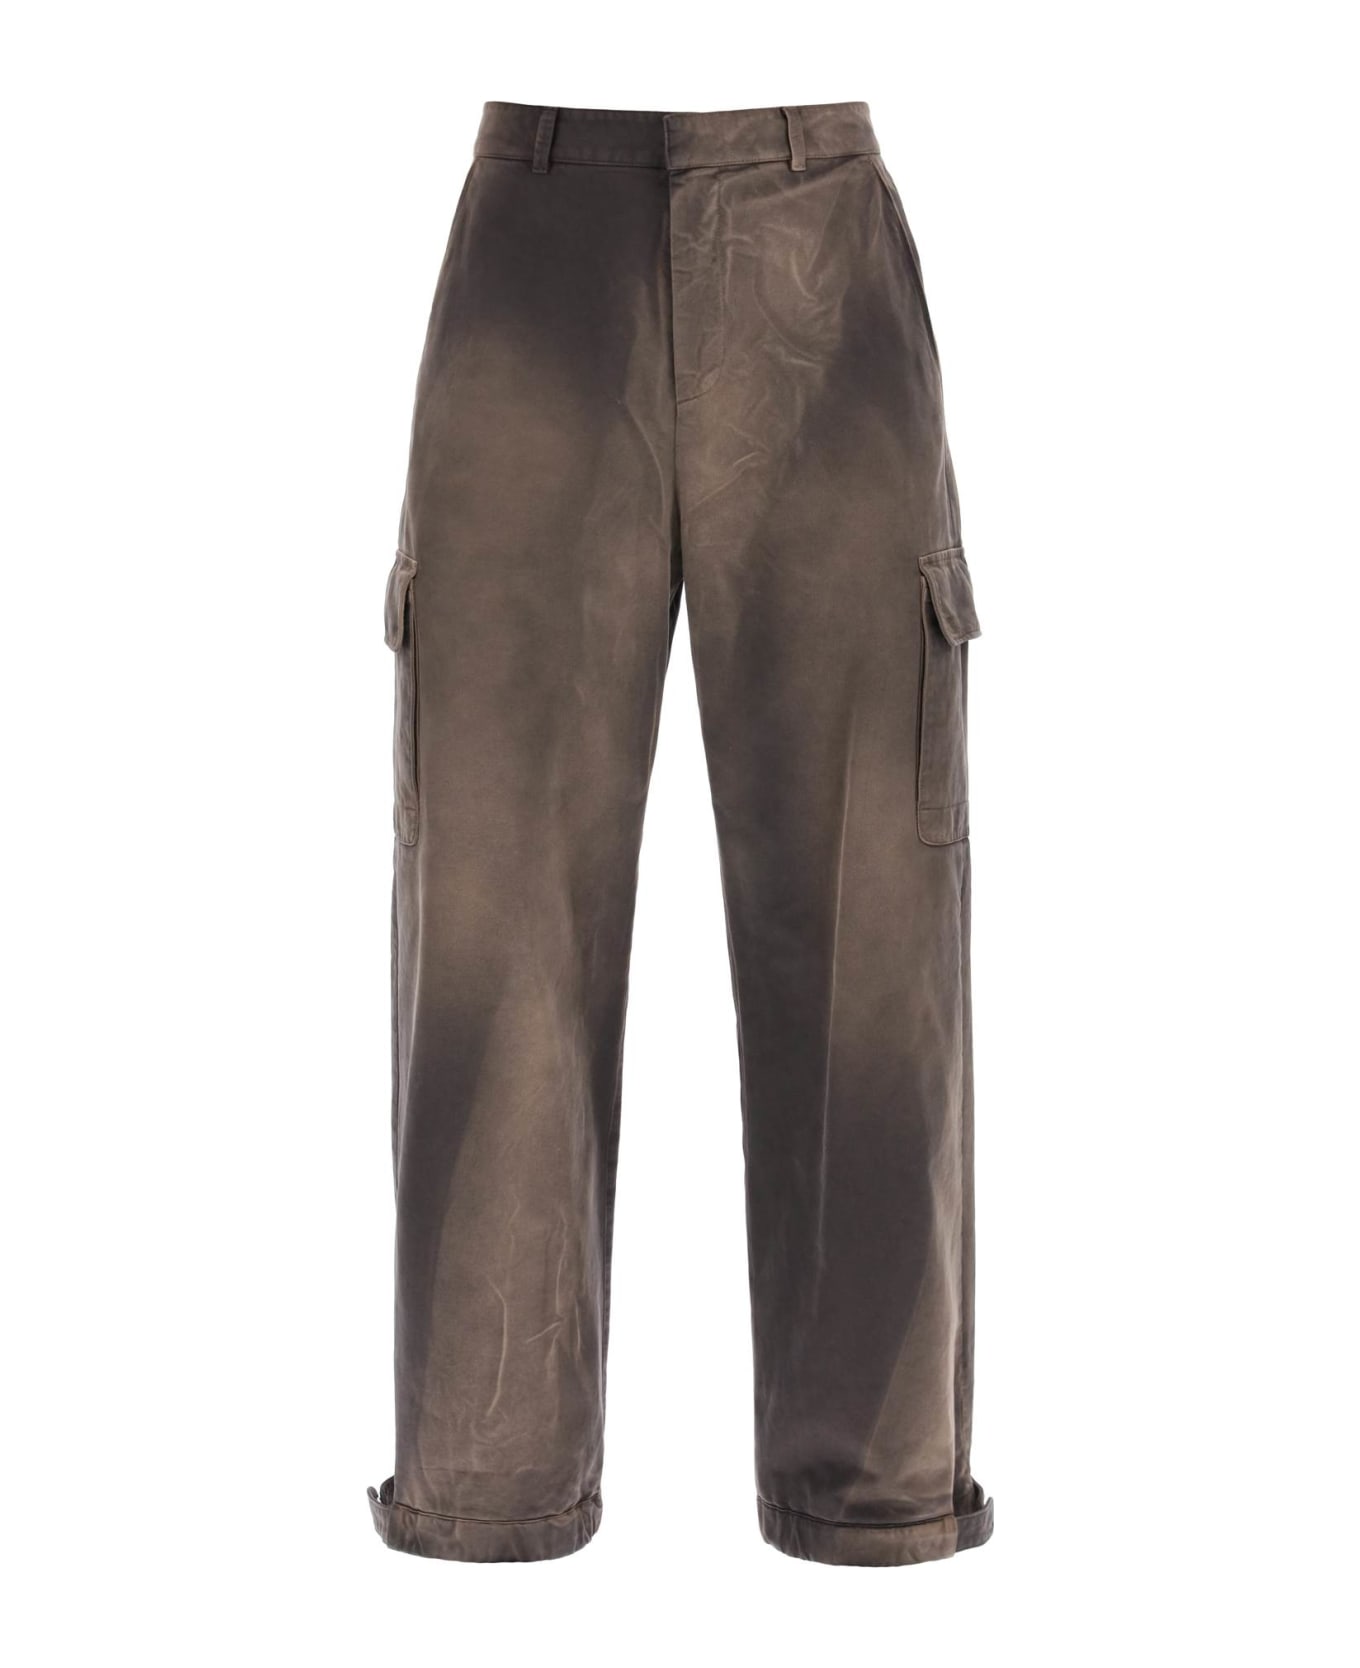 Off-White Cargo Pants - ANTHRACITE (Brown)